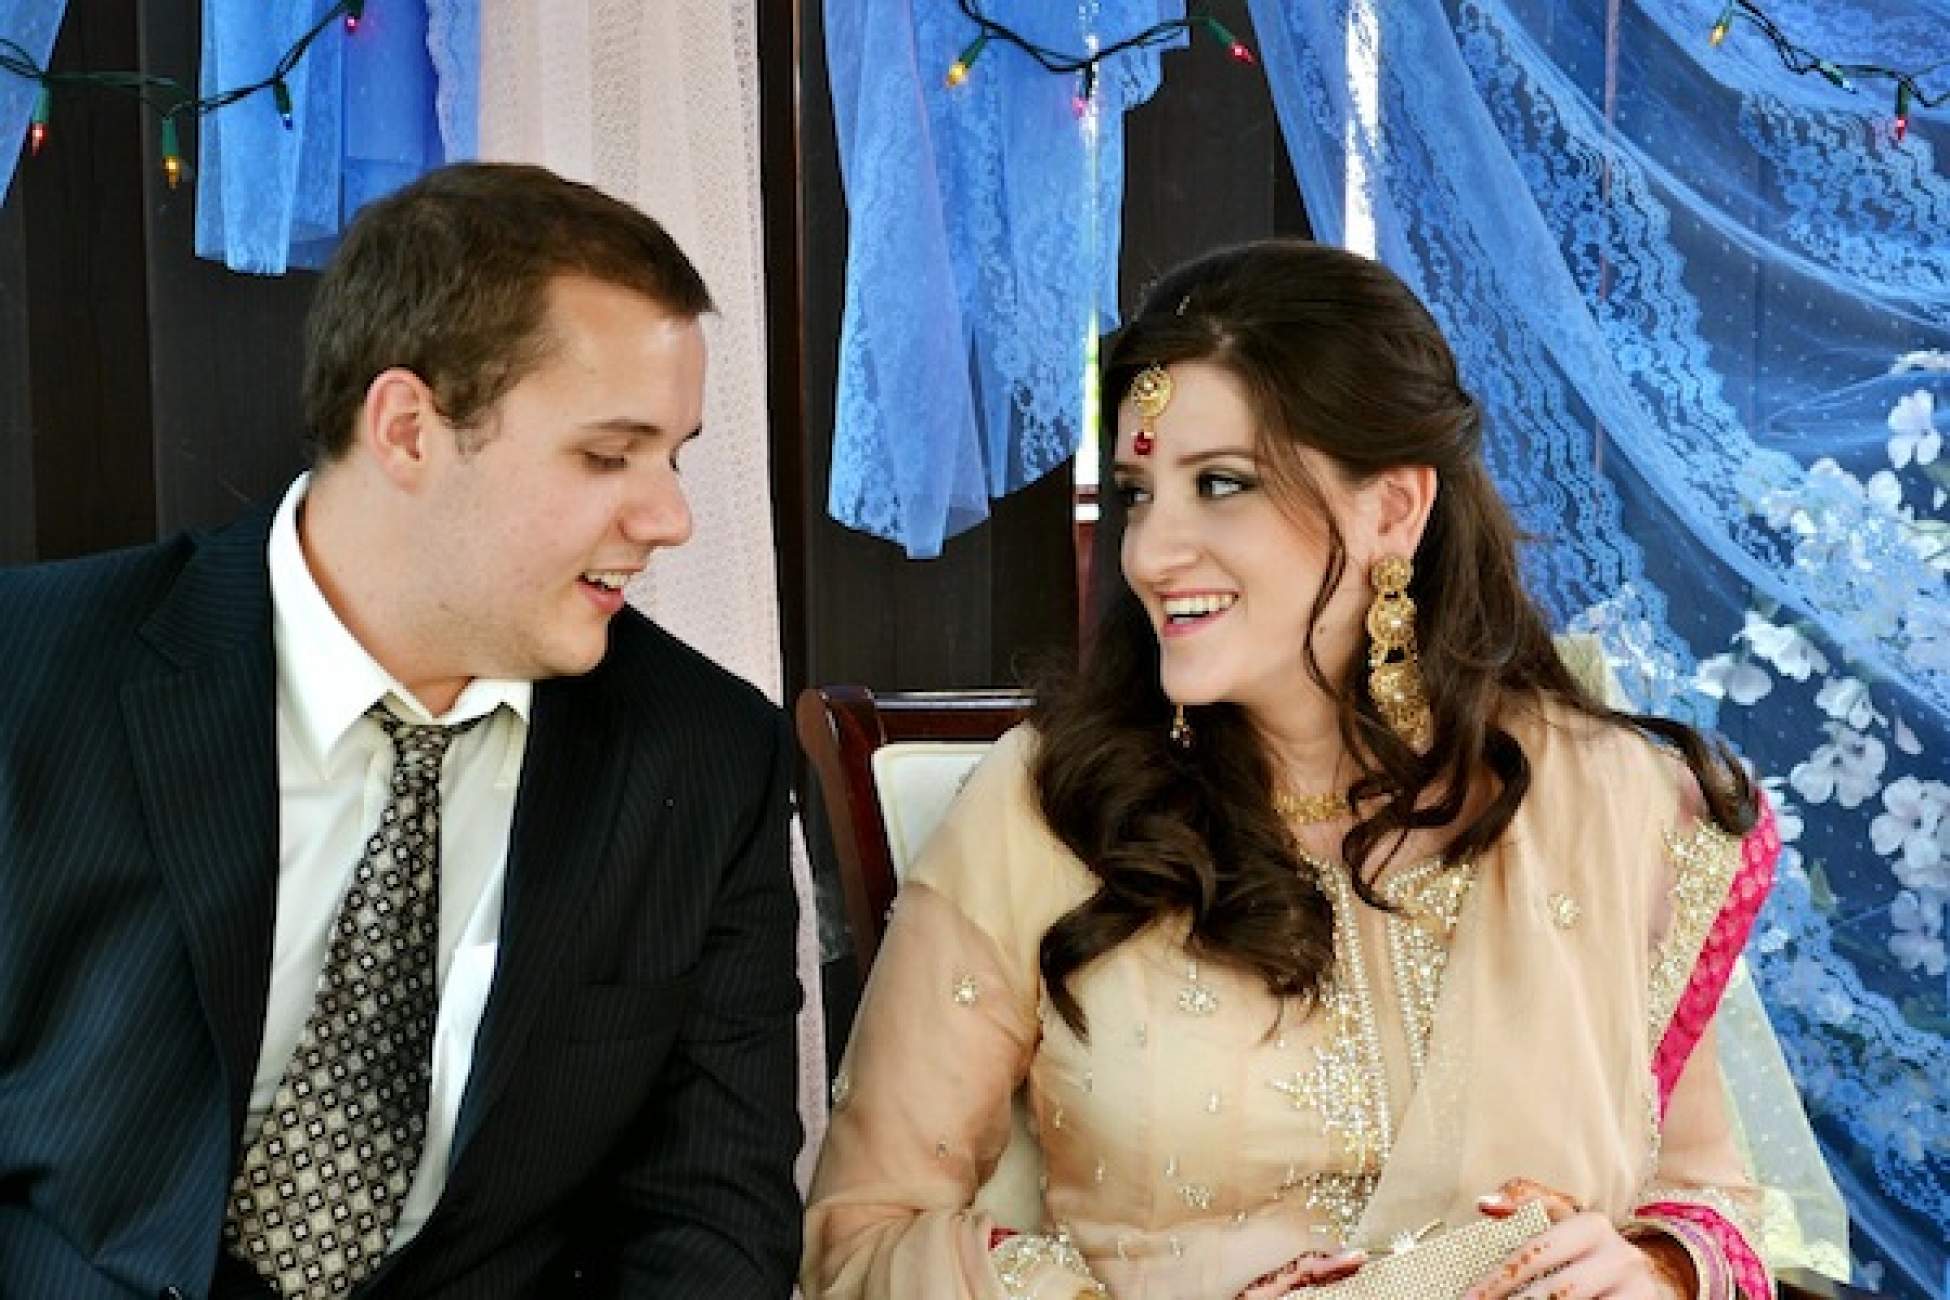 Sidrah and her fiancee at their engagement party.